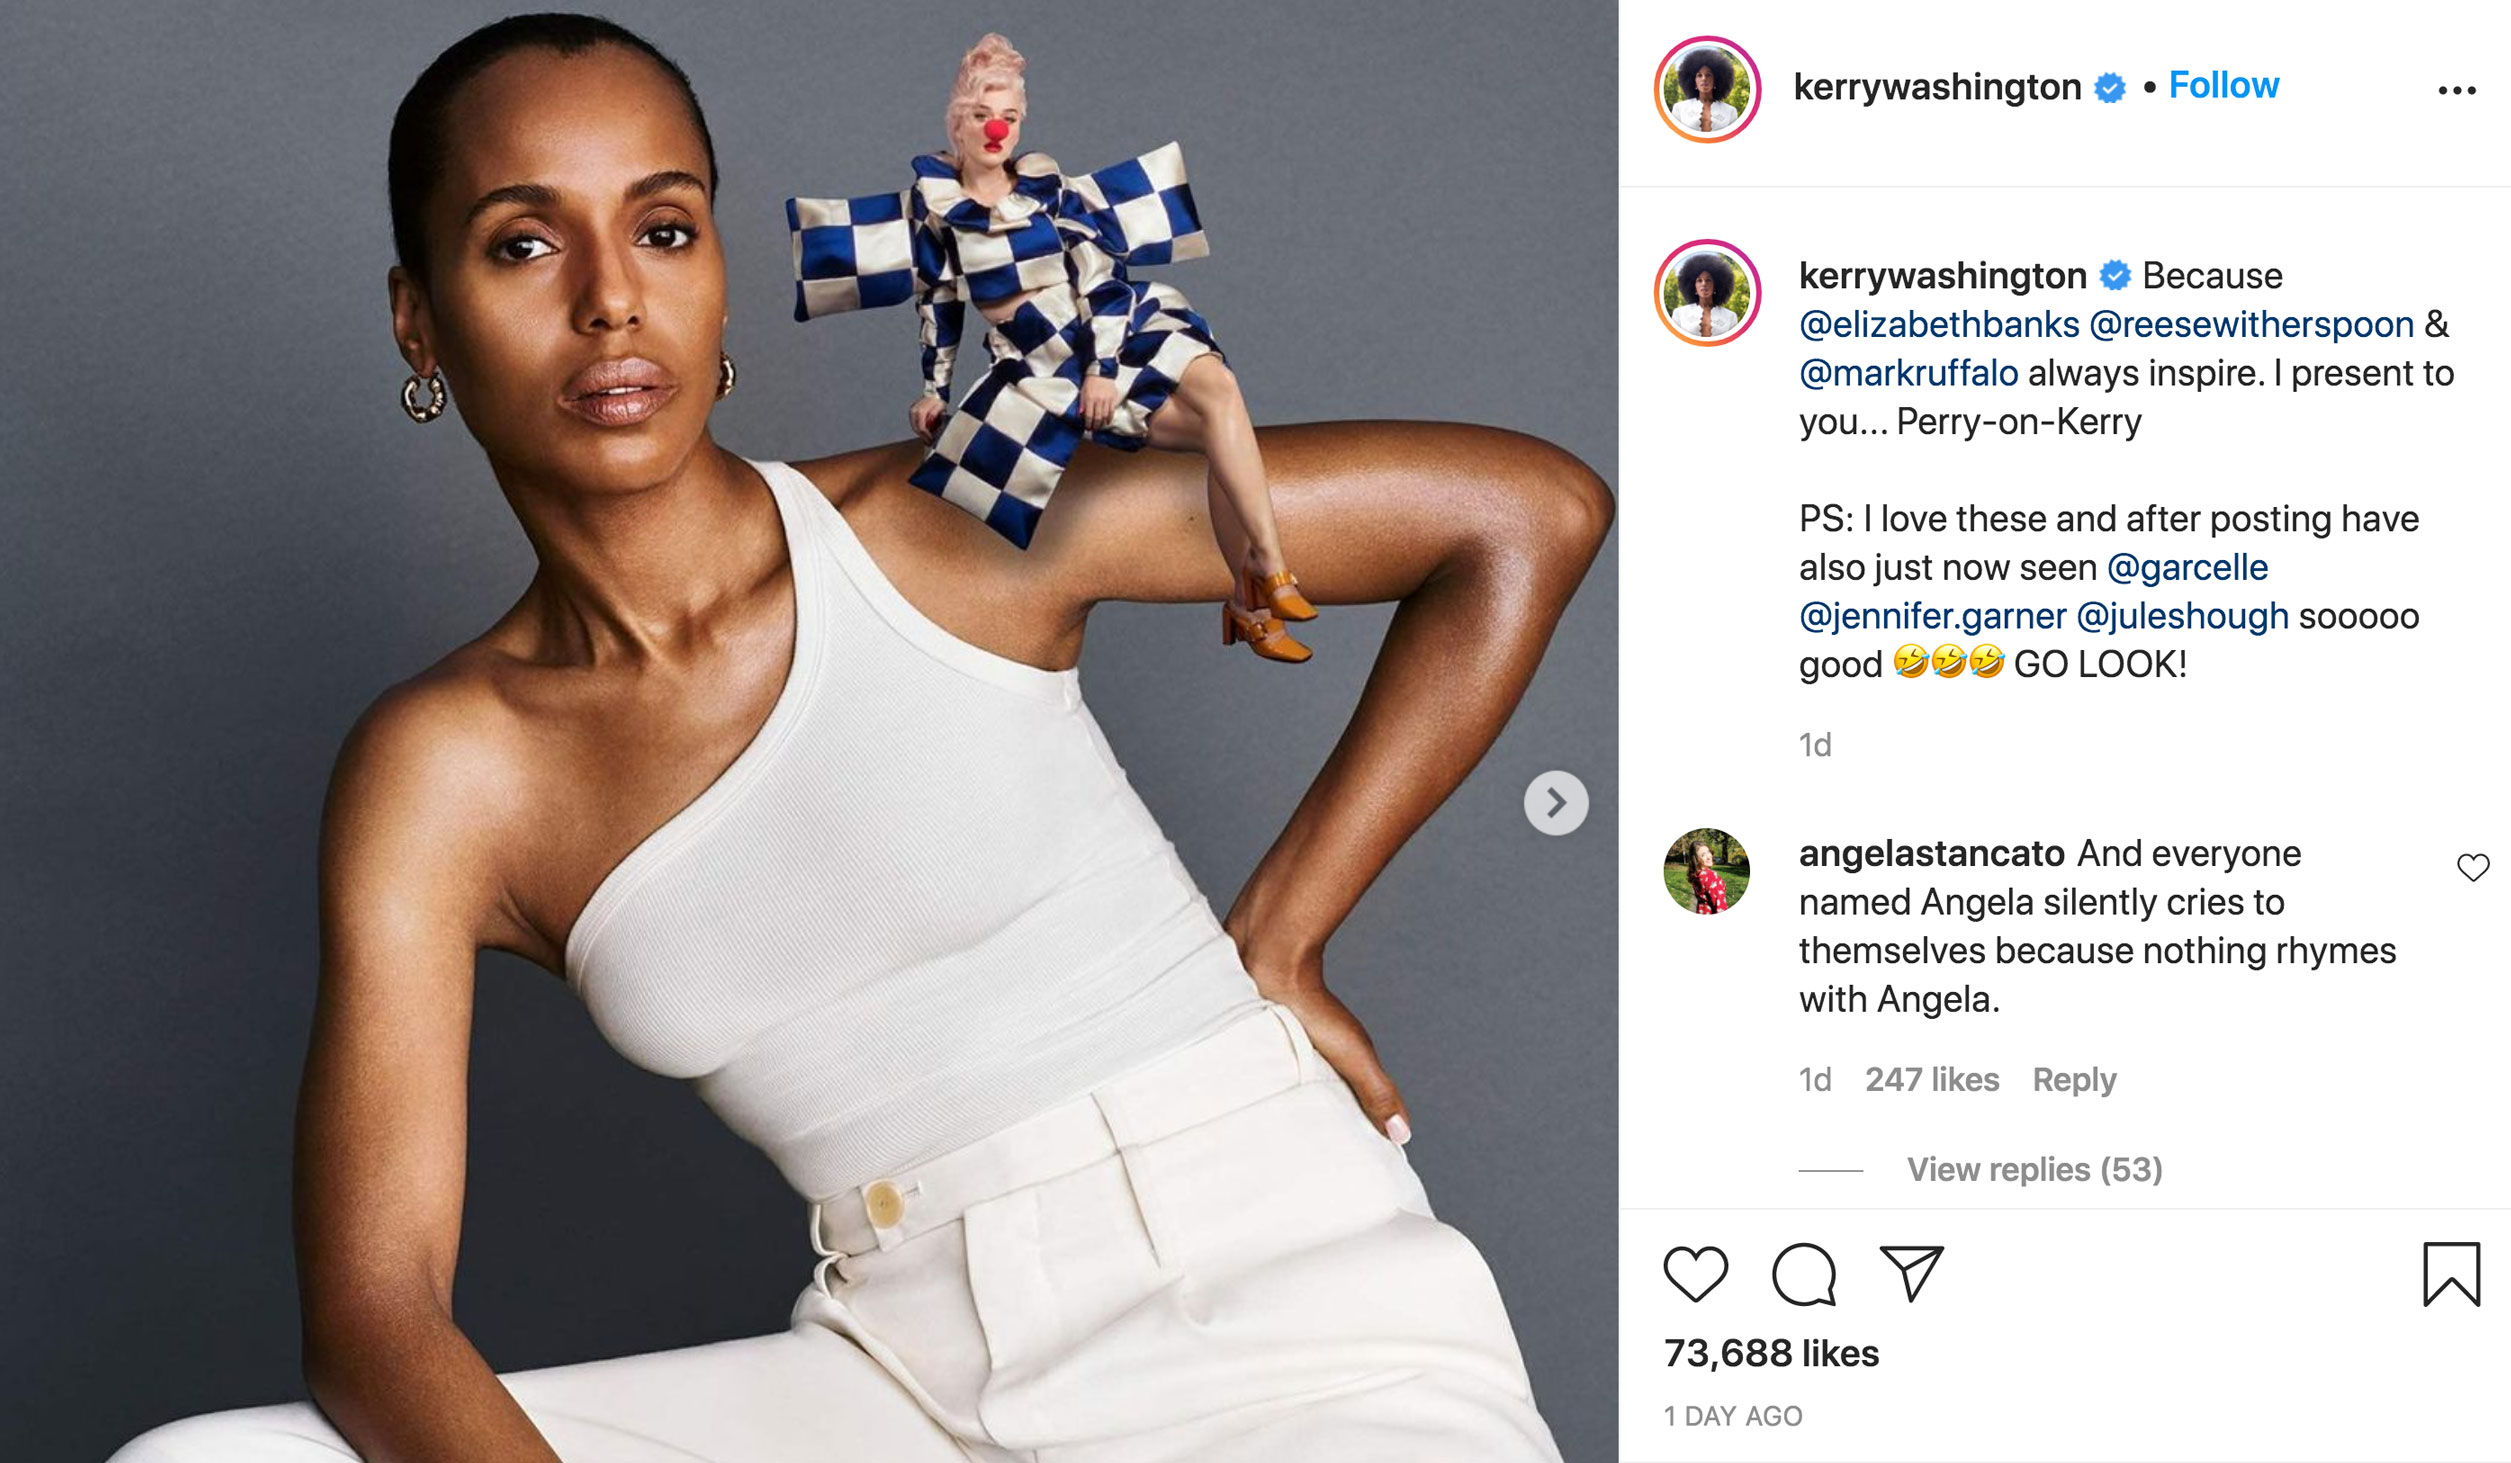 kerry washington porter - kerrywashington. kerrywashington Because & always inspire. I present to you... PerryonKerry Ps I love these and after posting have also just now seen .garner sooooo good O Go Look! 1d angelastancato And everyone named Angela sile